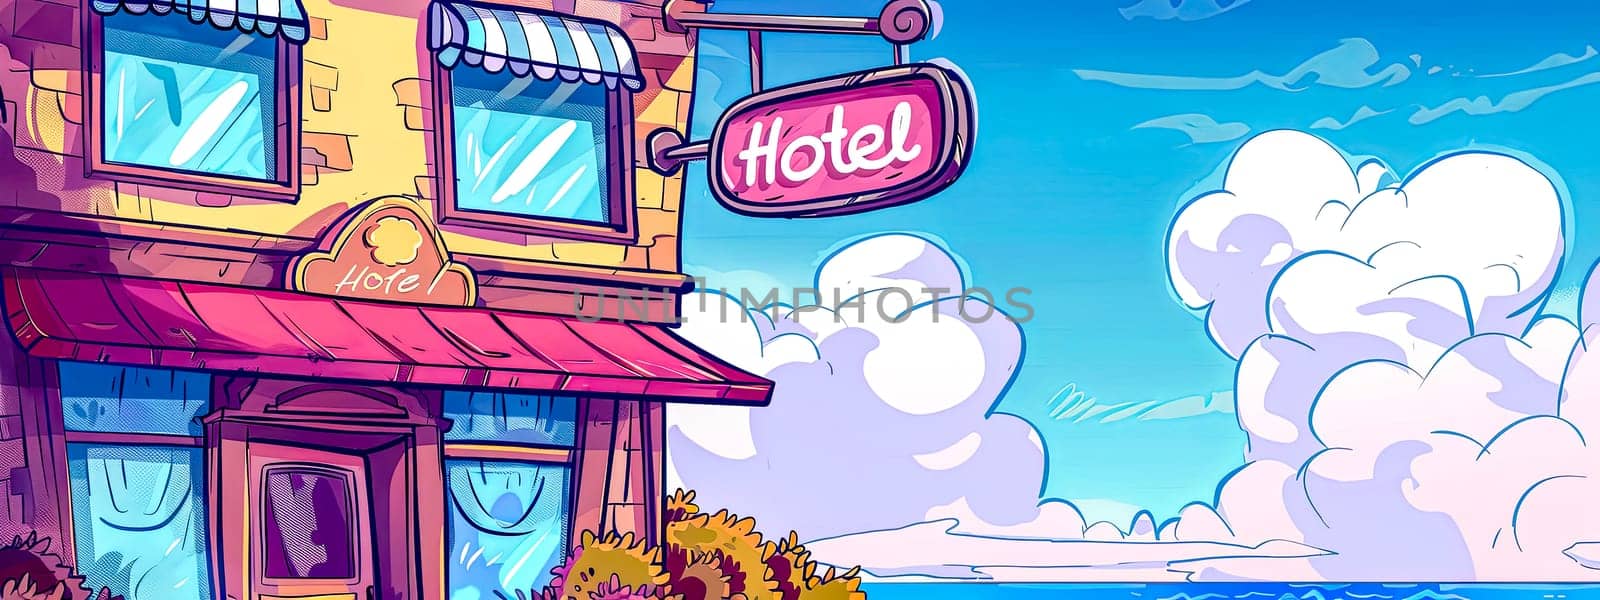 Vibrant illustration of a charming hotel with a sea view under a blue sky with fluffy clouds